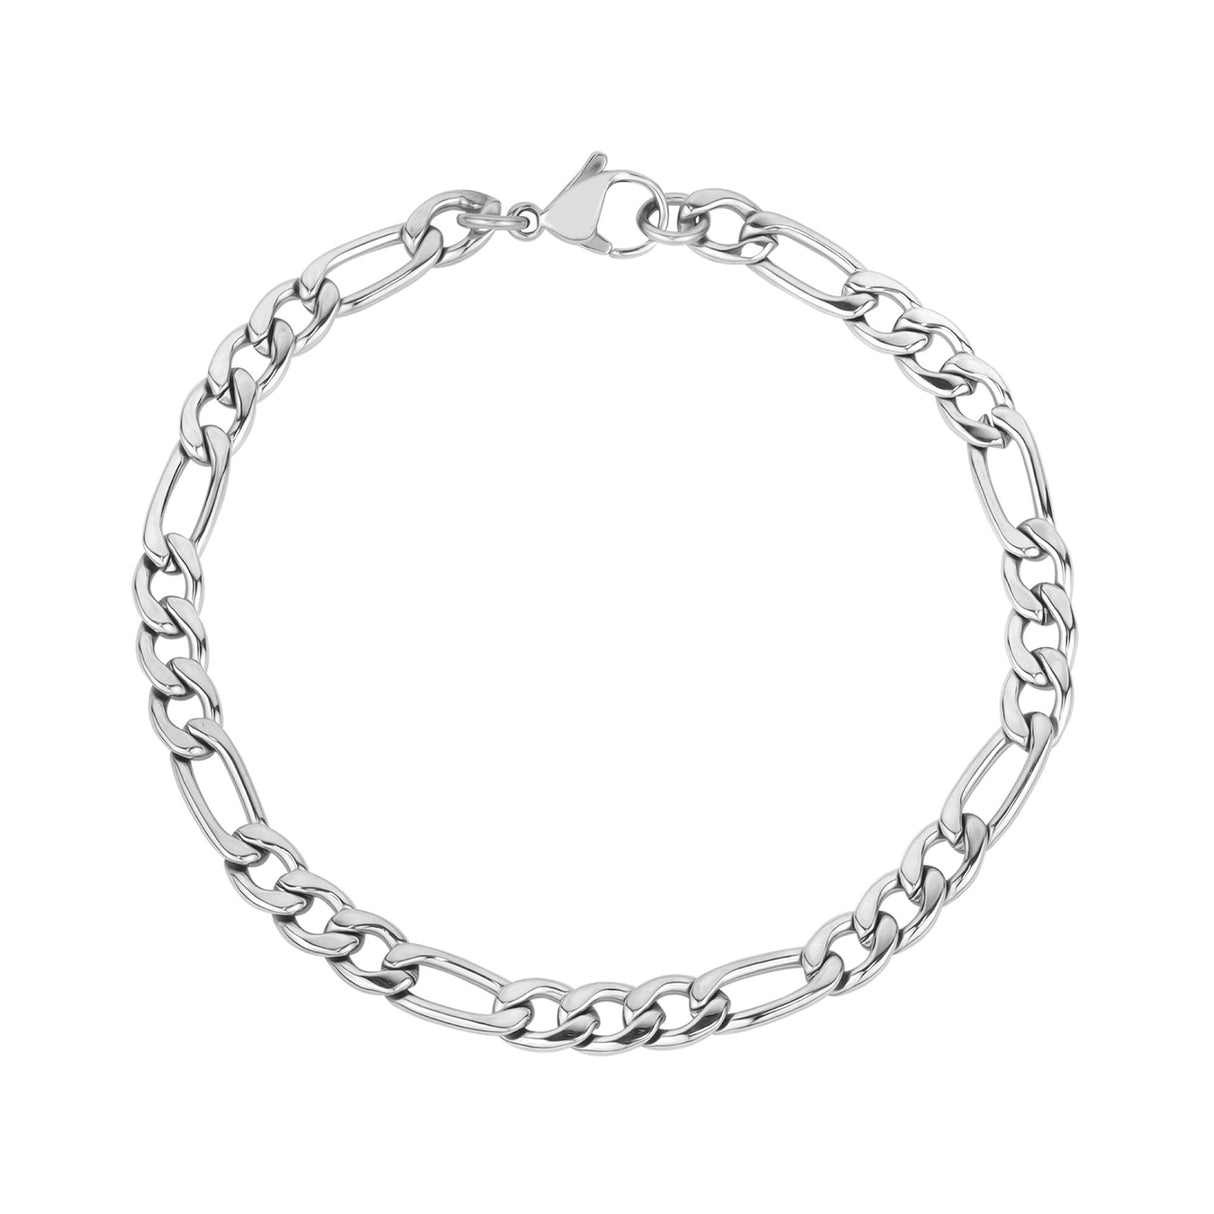 Mens 5mm Stainless Steel Gold Figaro Link Bracelet 9 Inches / Silver